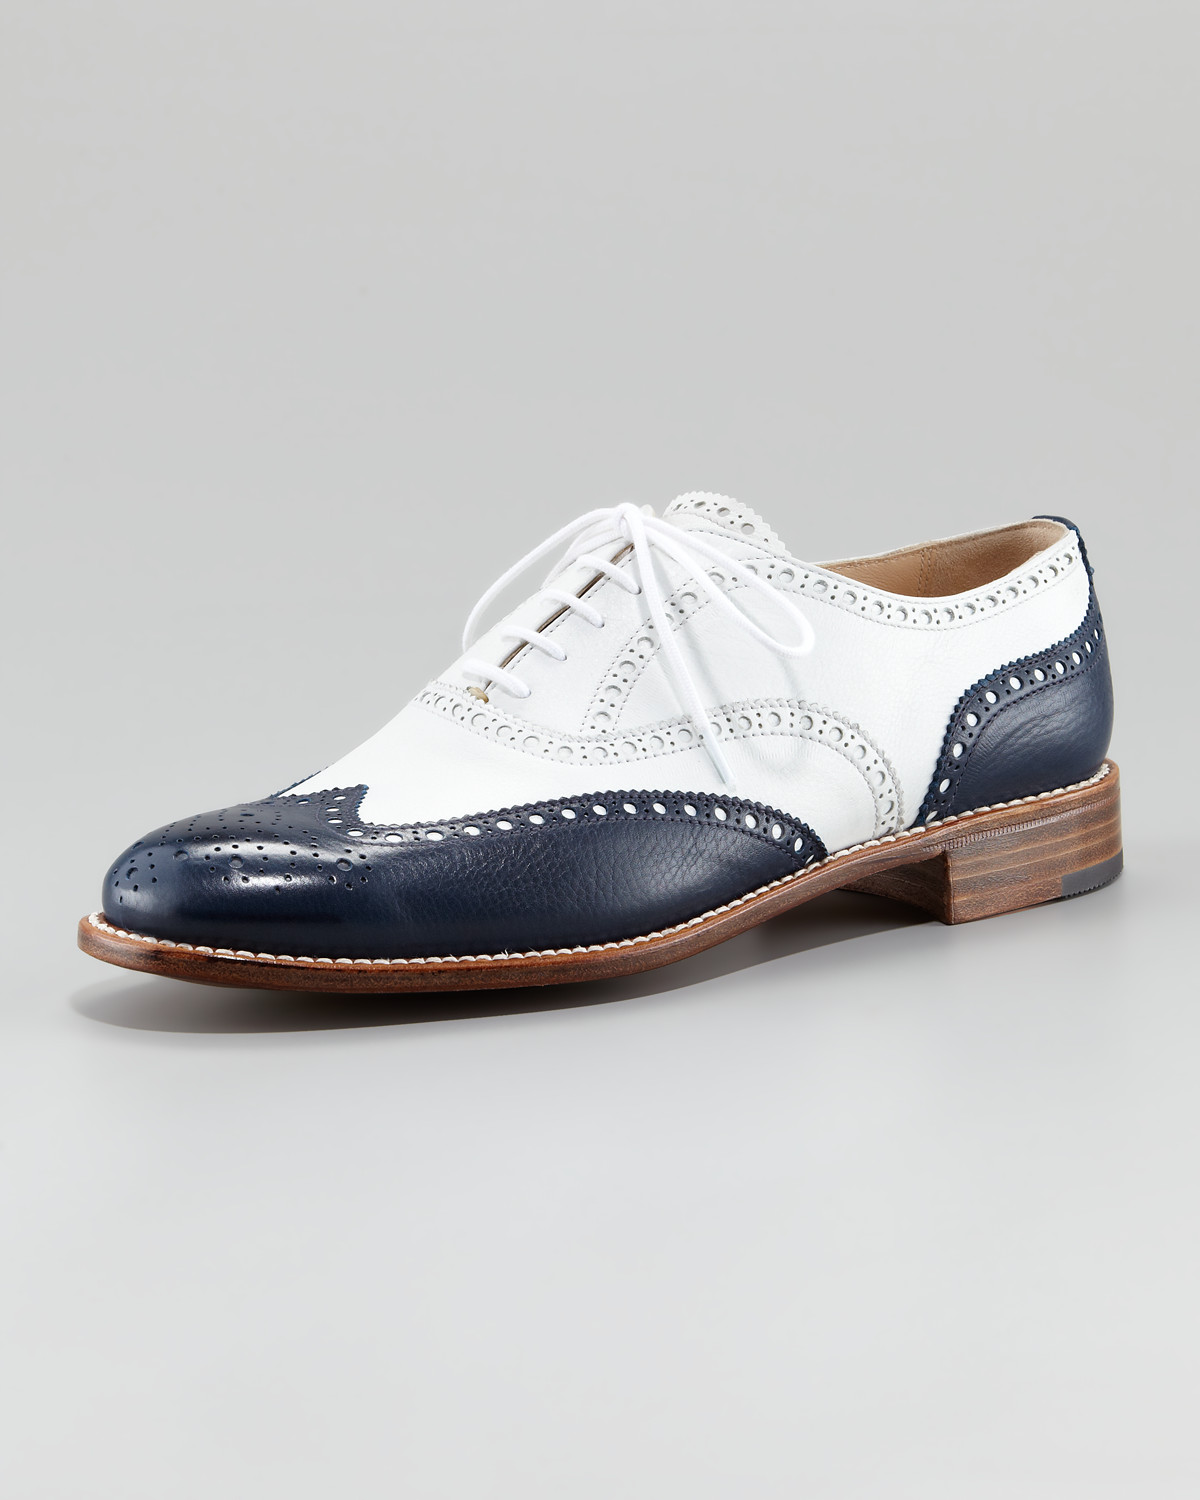 blue and white wingtip shoes